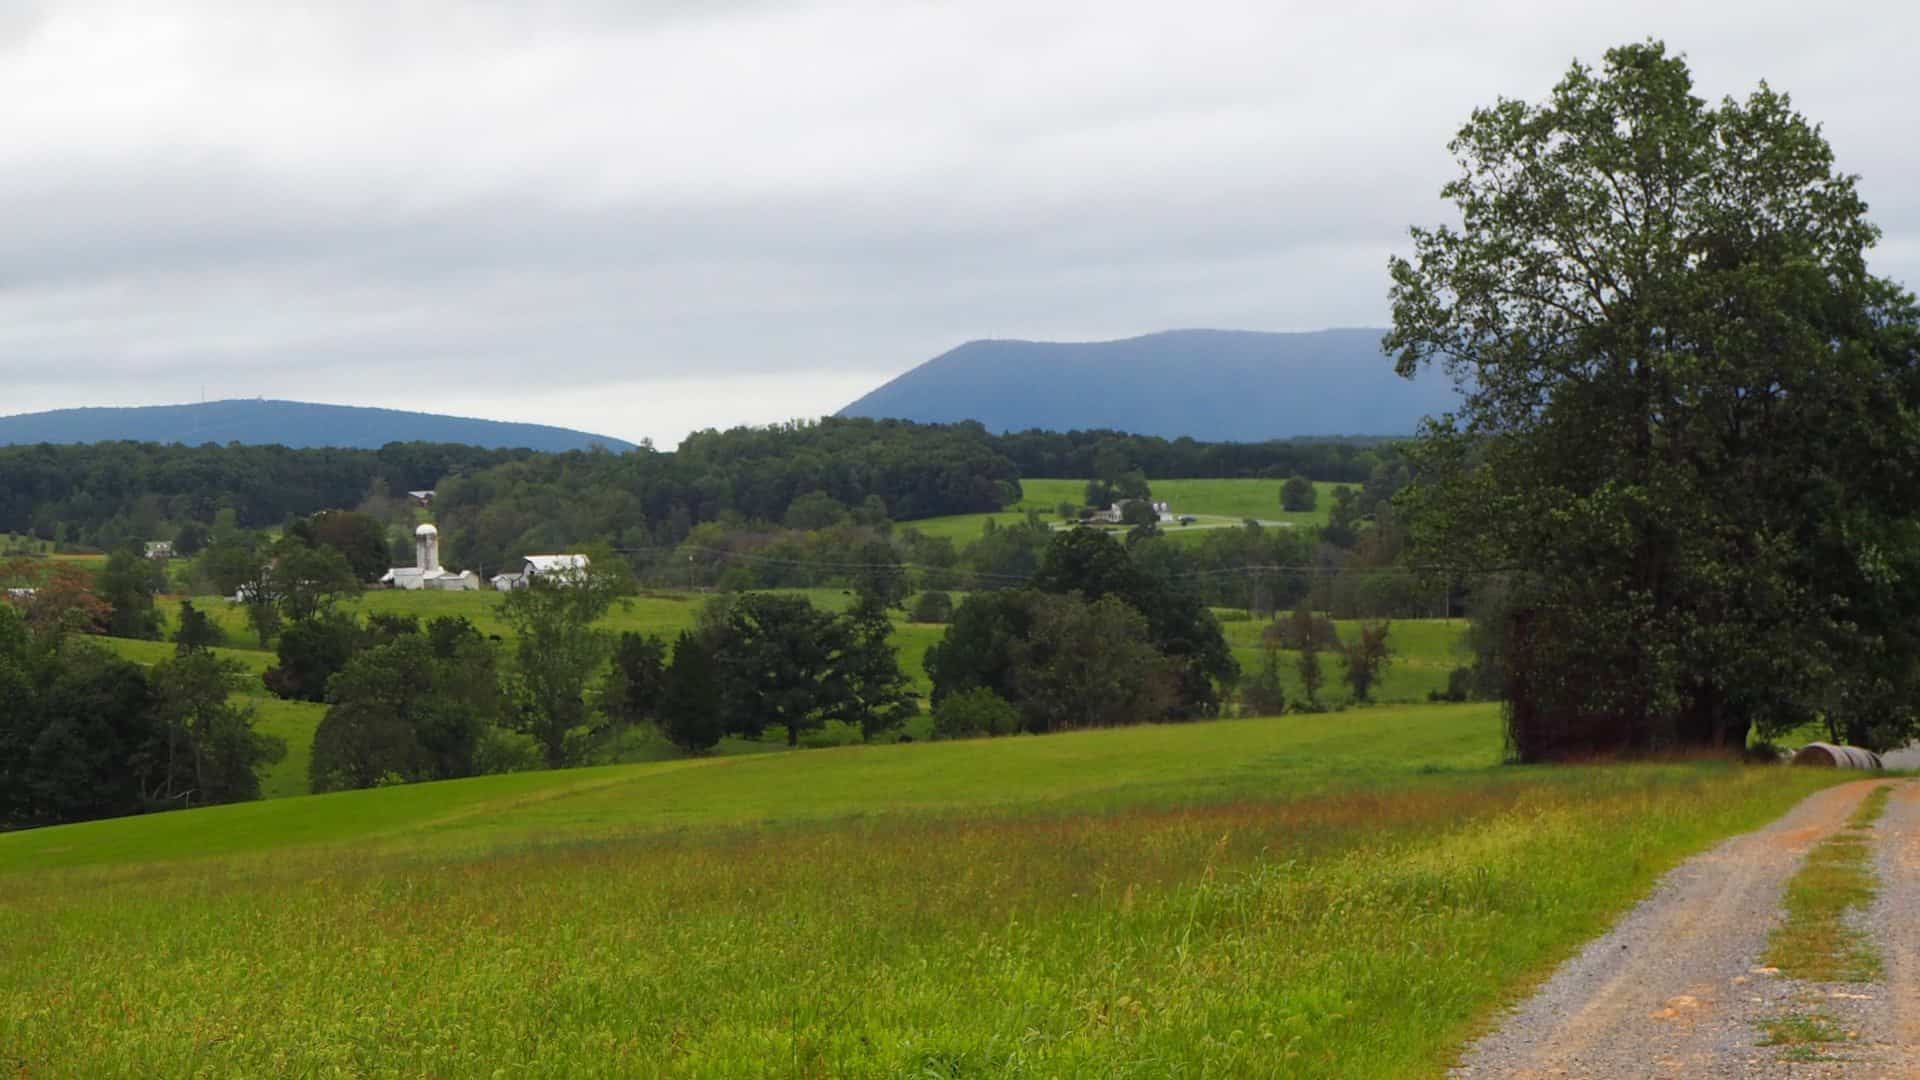 Countryside with green grass, trees, farms, and hills in the background